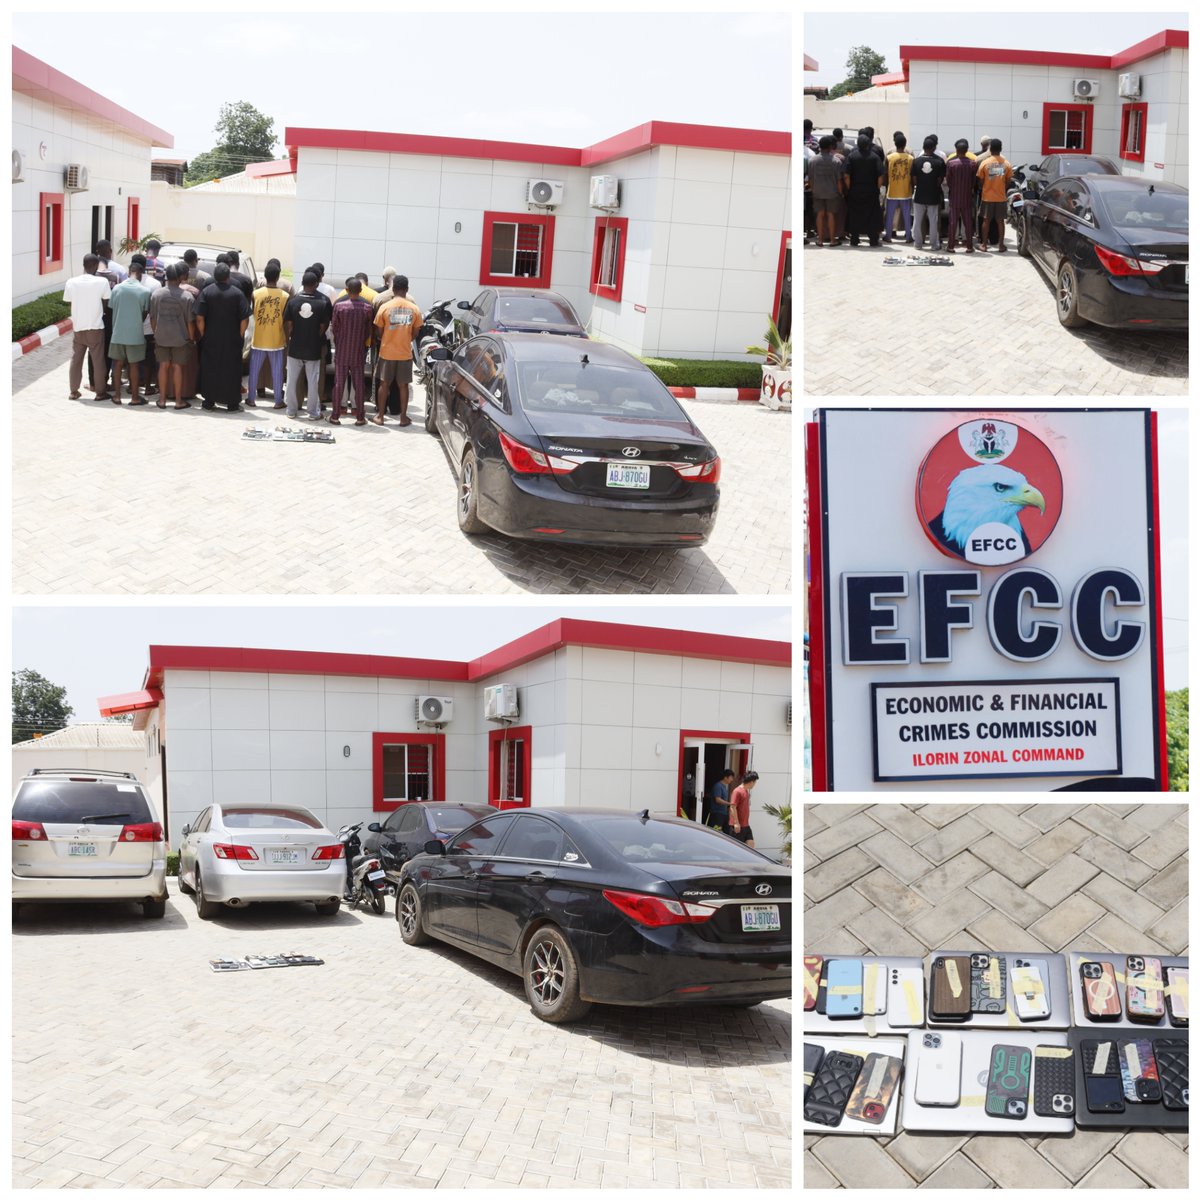 EFCC Arrests 44 Suspected Internet Fraudsters in Calabar Investigators at the Uyo Zonal Command of the Economic and Financial Crimes Commission,  EFCC, have arrested forty-four(44) suspected internet fraudsters. The suspected fraudsters were arrested in an early morning sting